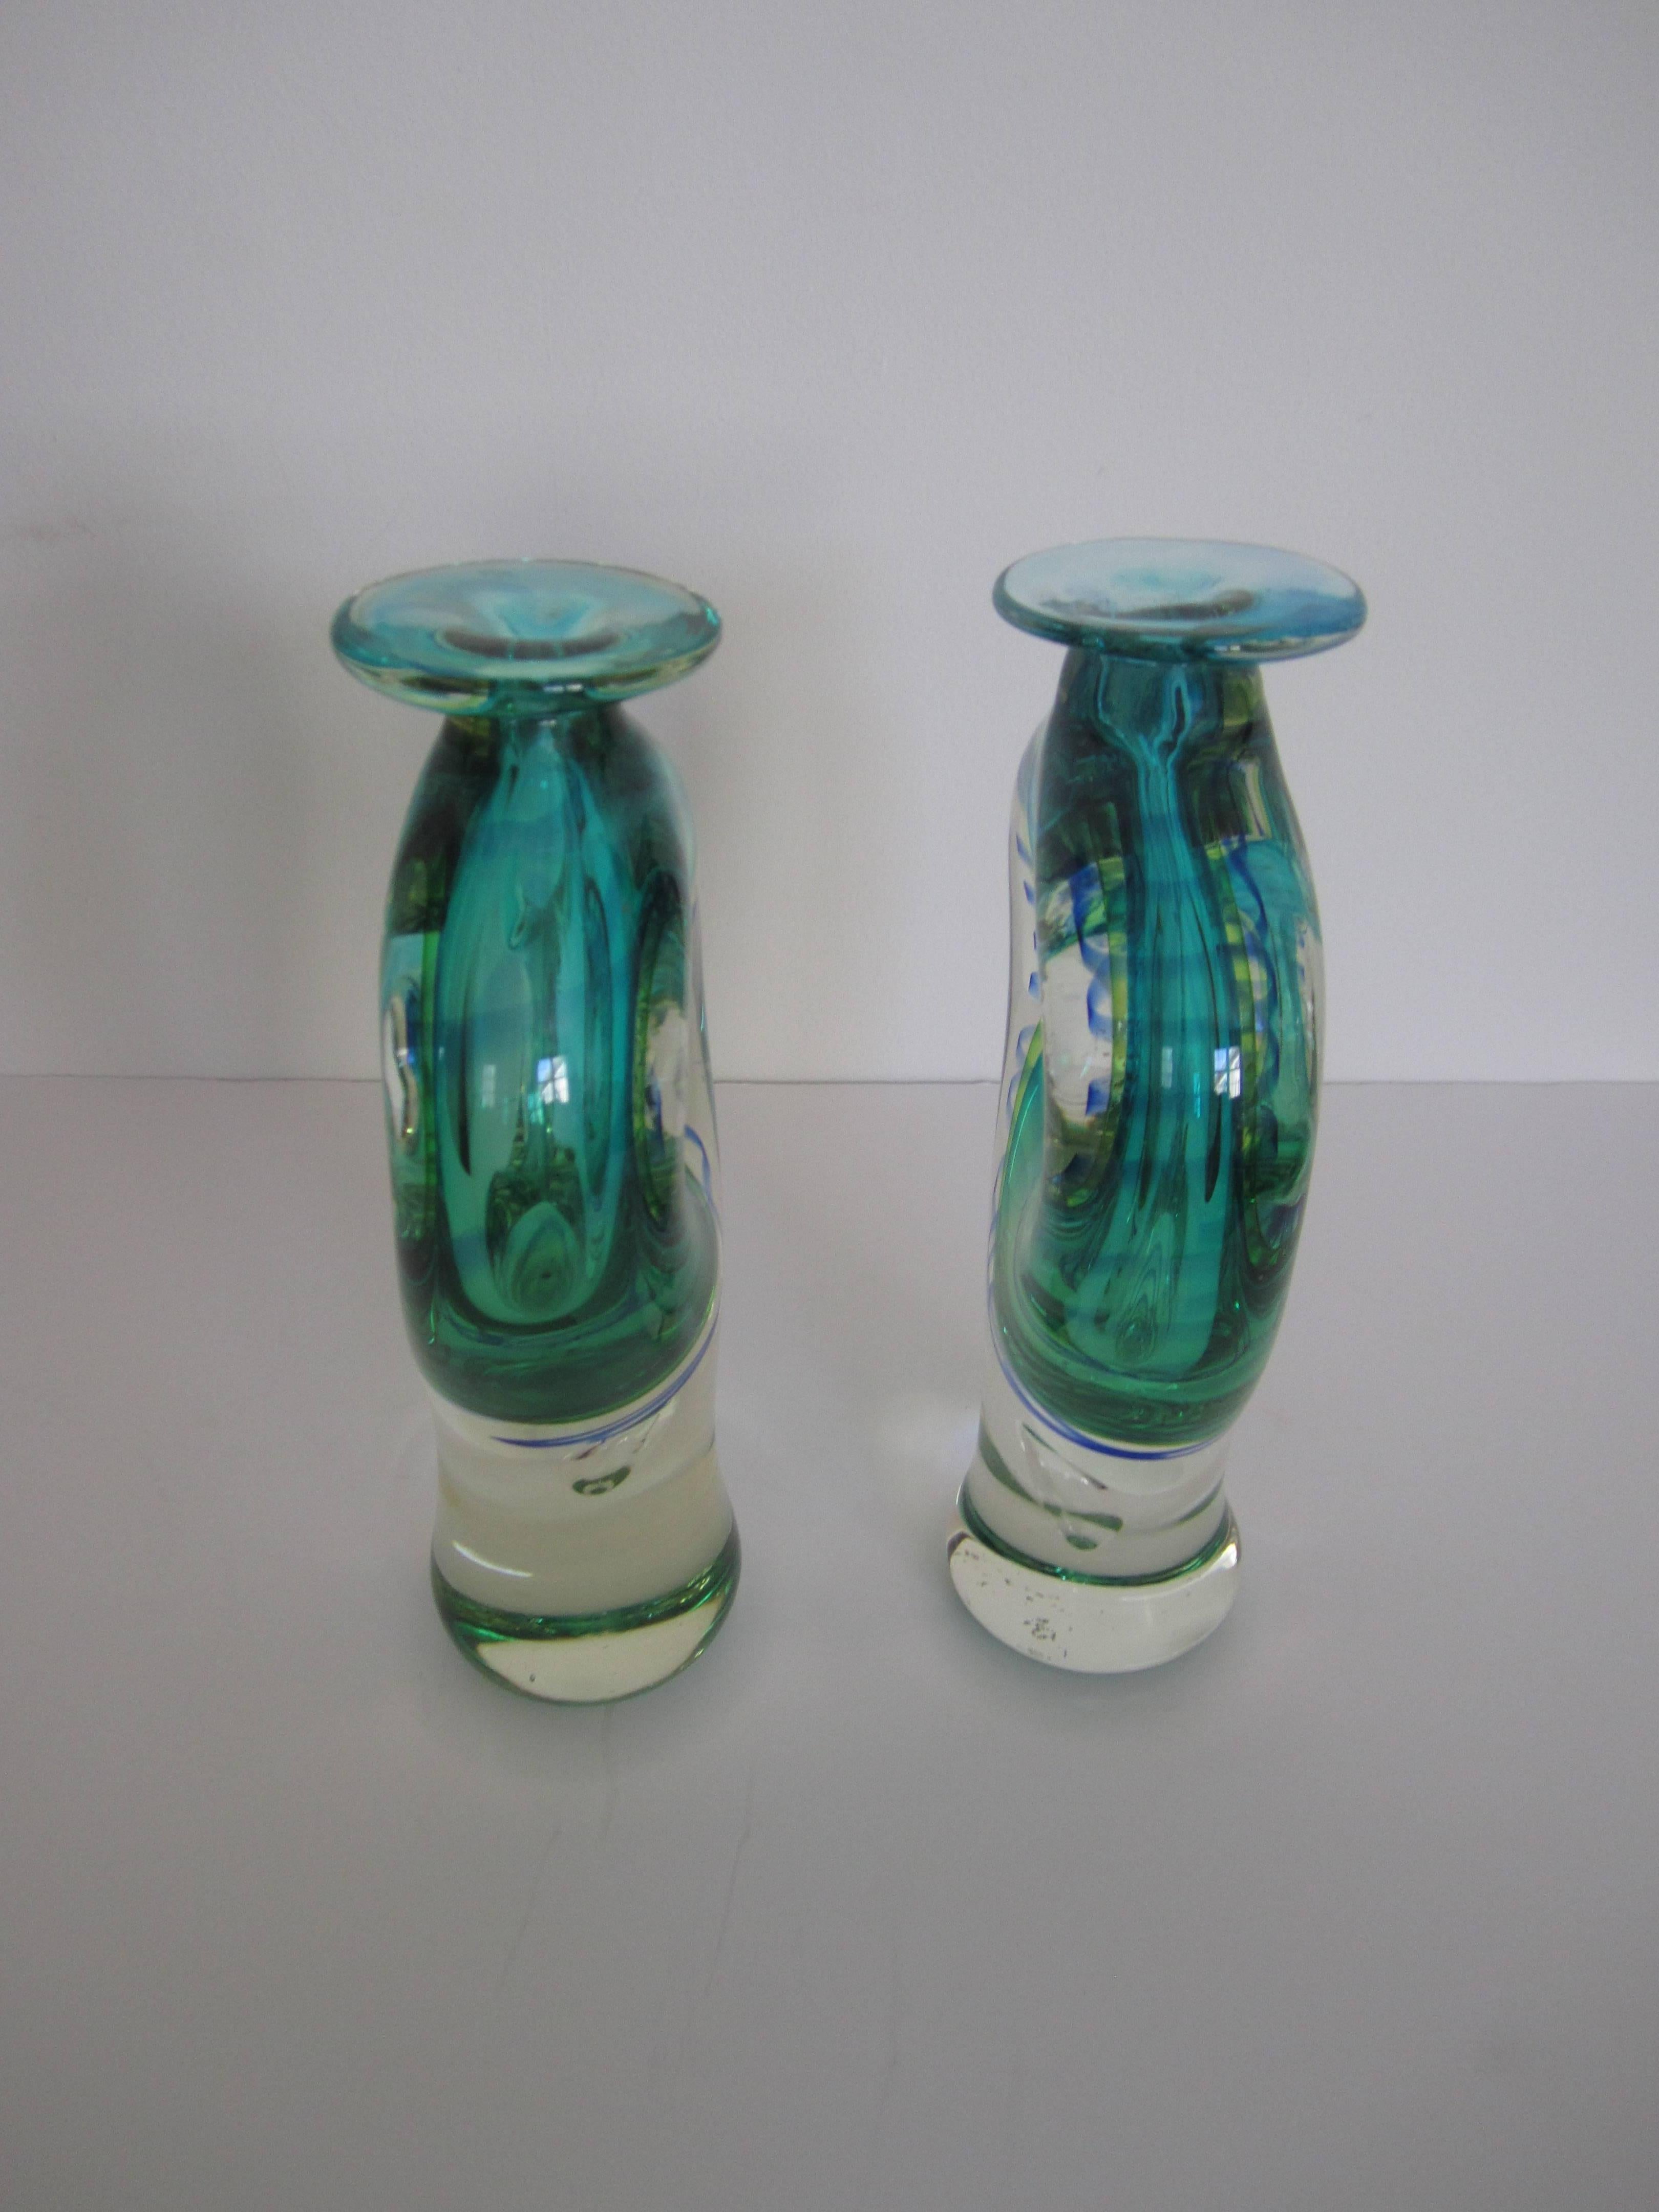 Pair of Modern Blue and Green Art Glass Vessels or Vases 4